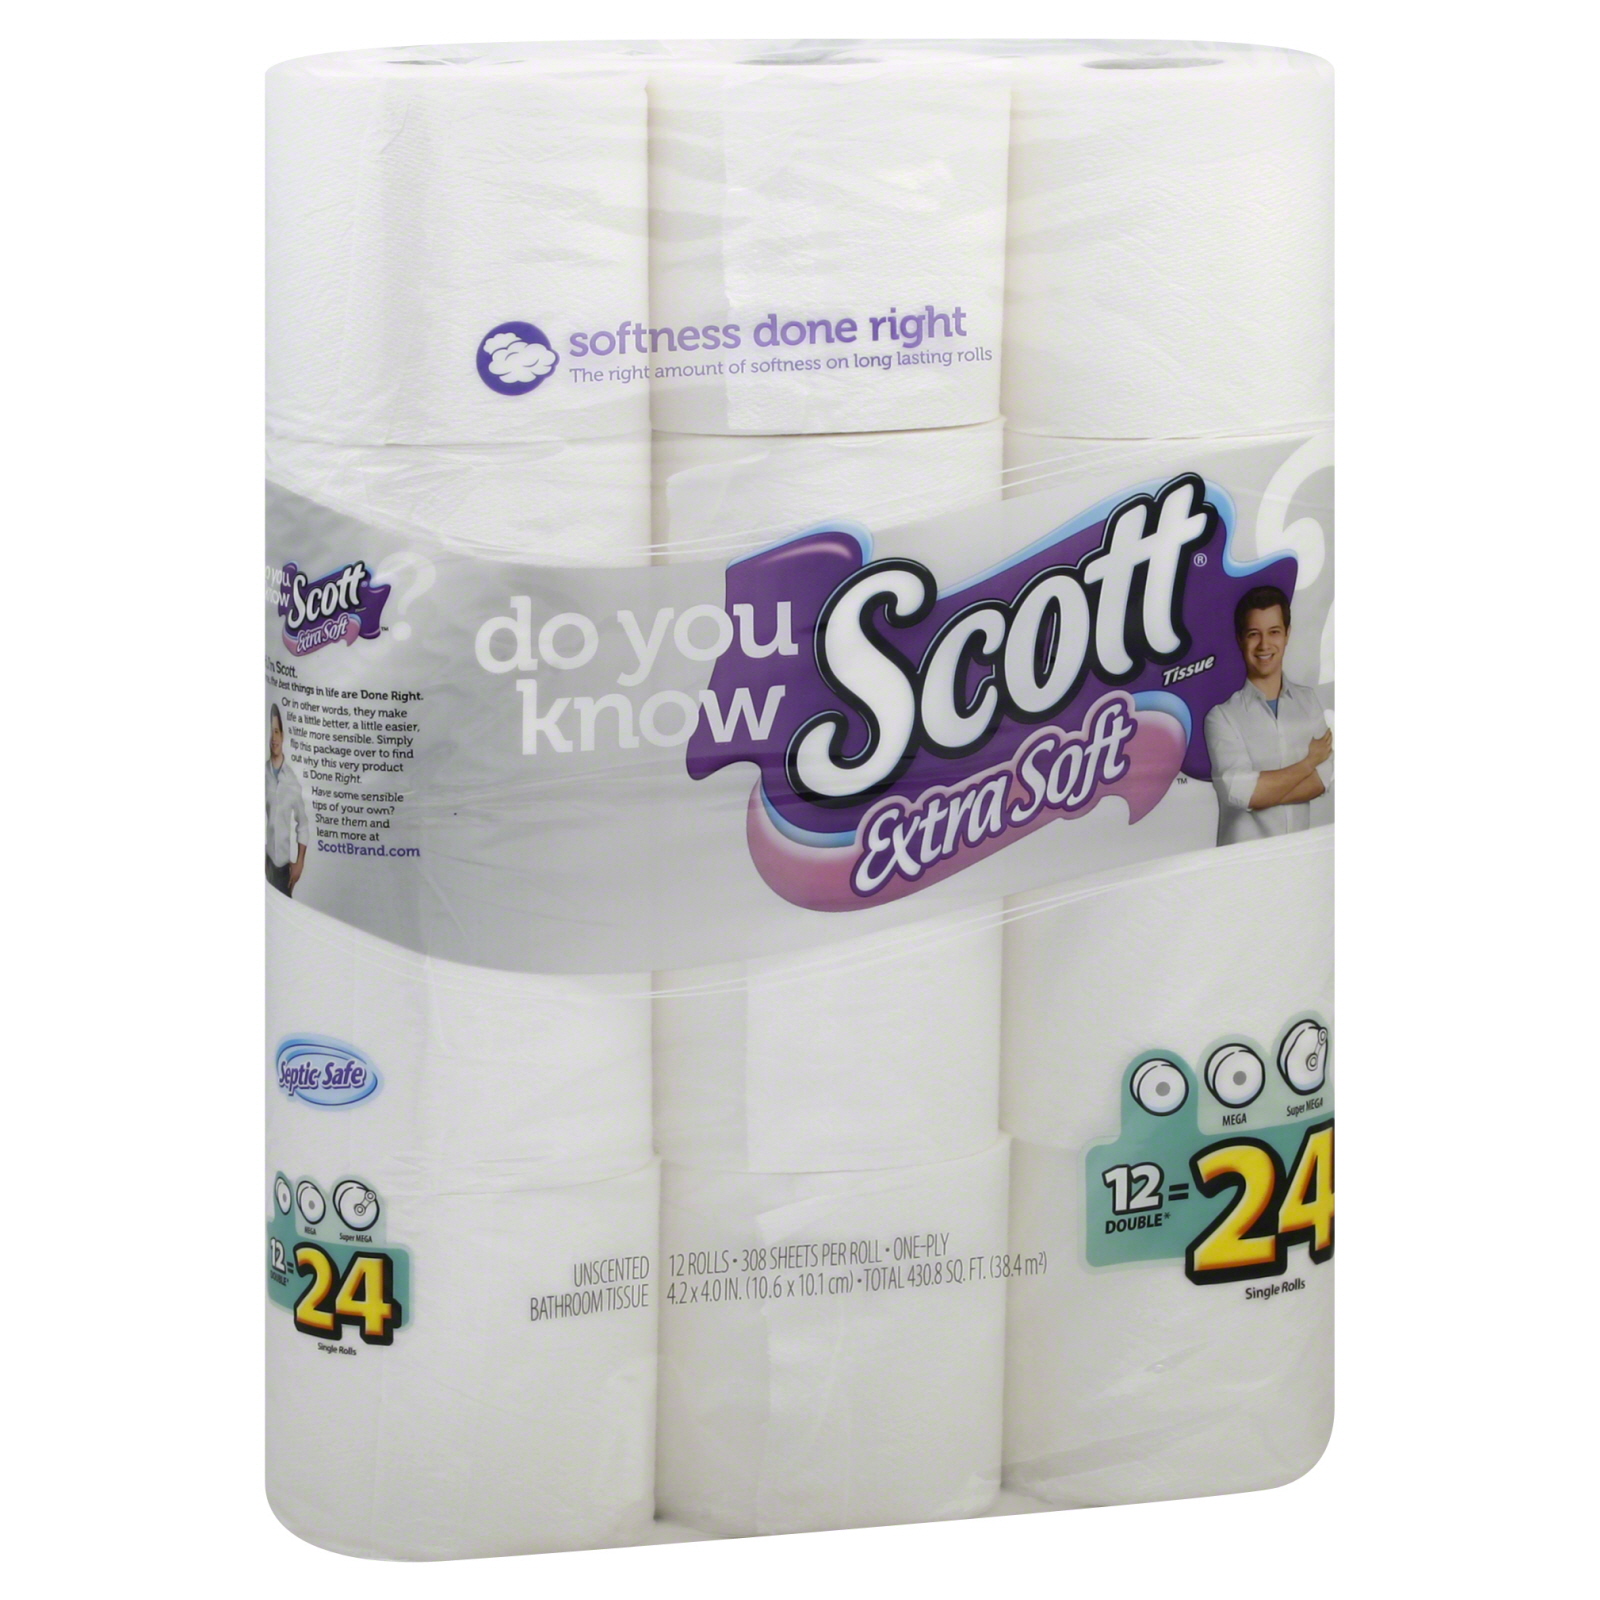 Scott Extra Soft Tissue, Unscented, One-Ply - 12 Double Rolls